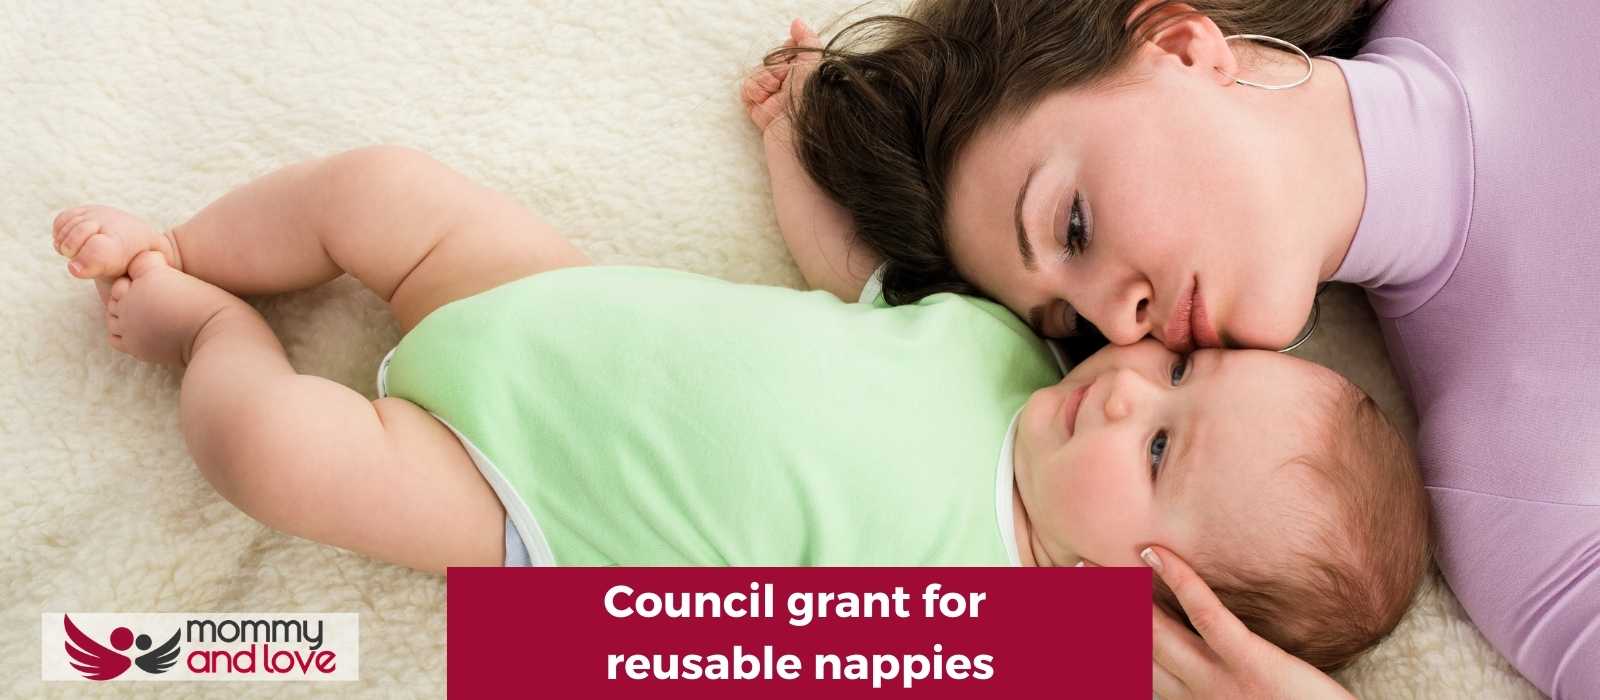 Council grant for reusable nappies